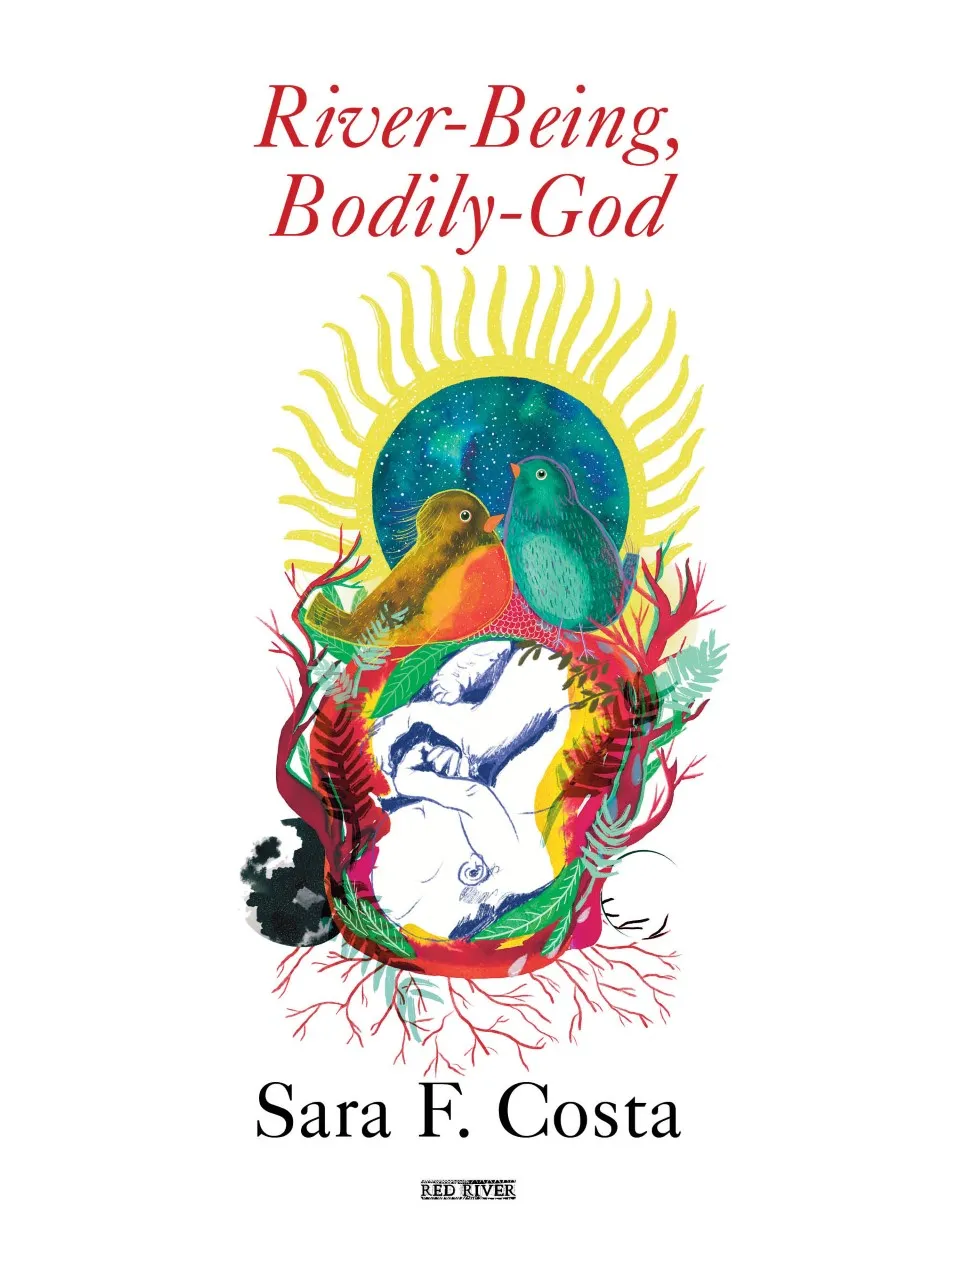 Costa digs into the narrator’s increased awareness of her role in the world, as well as the comprehension of her body and relationship with the natural world.